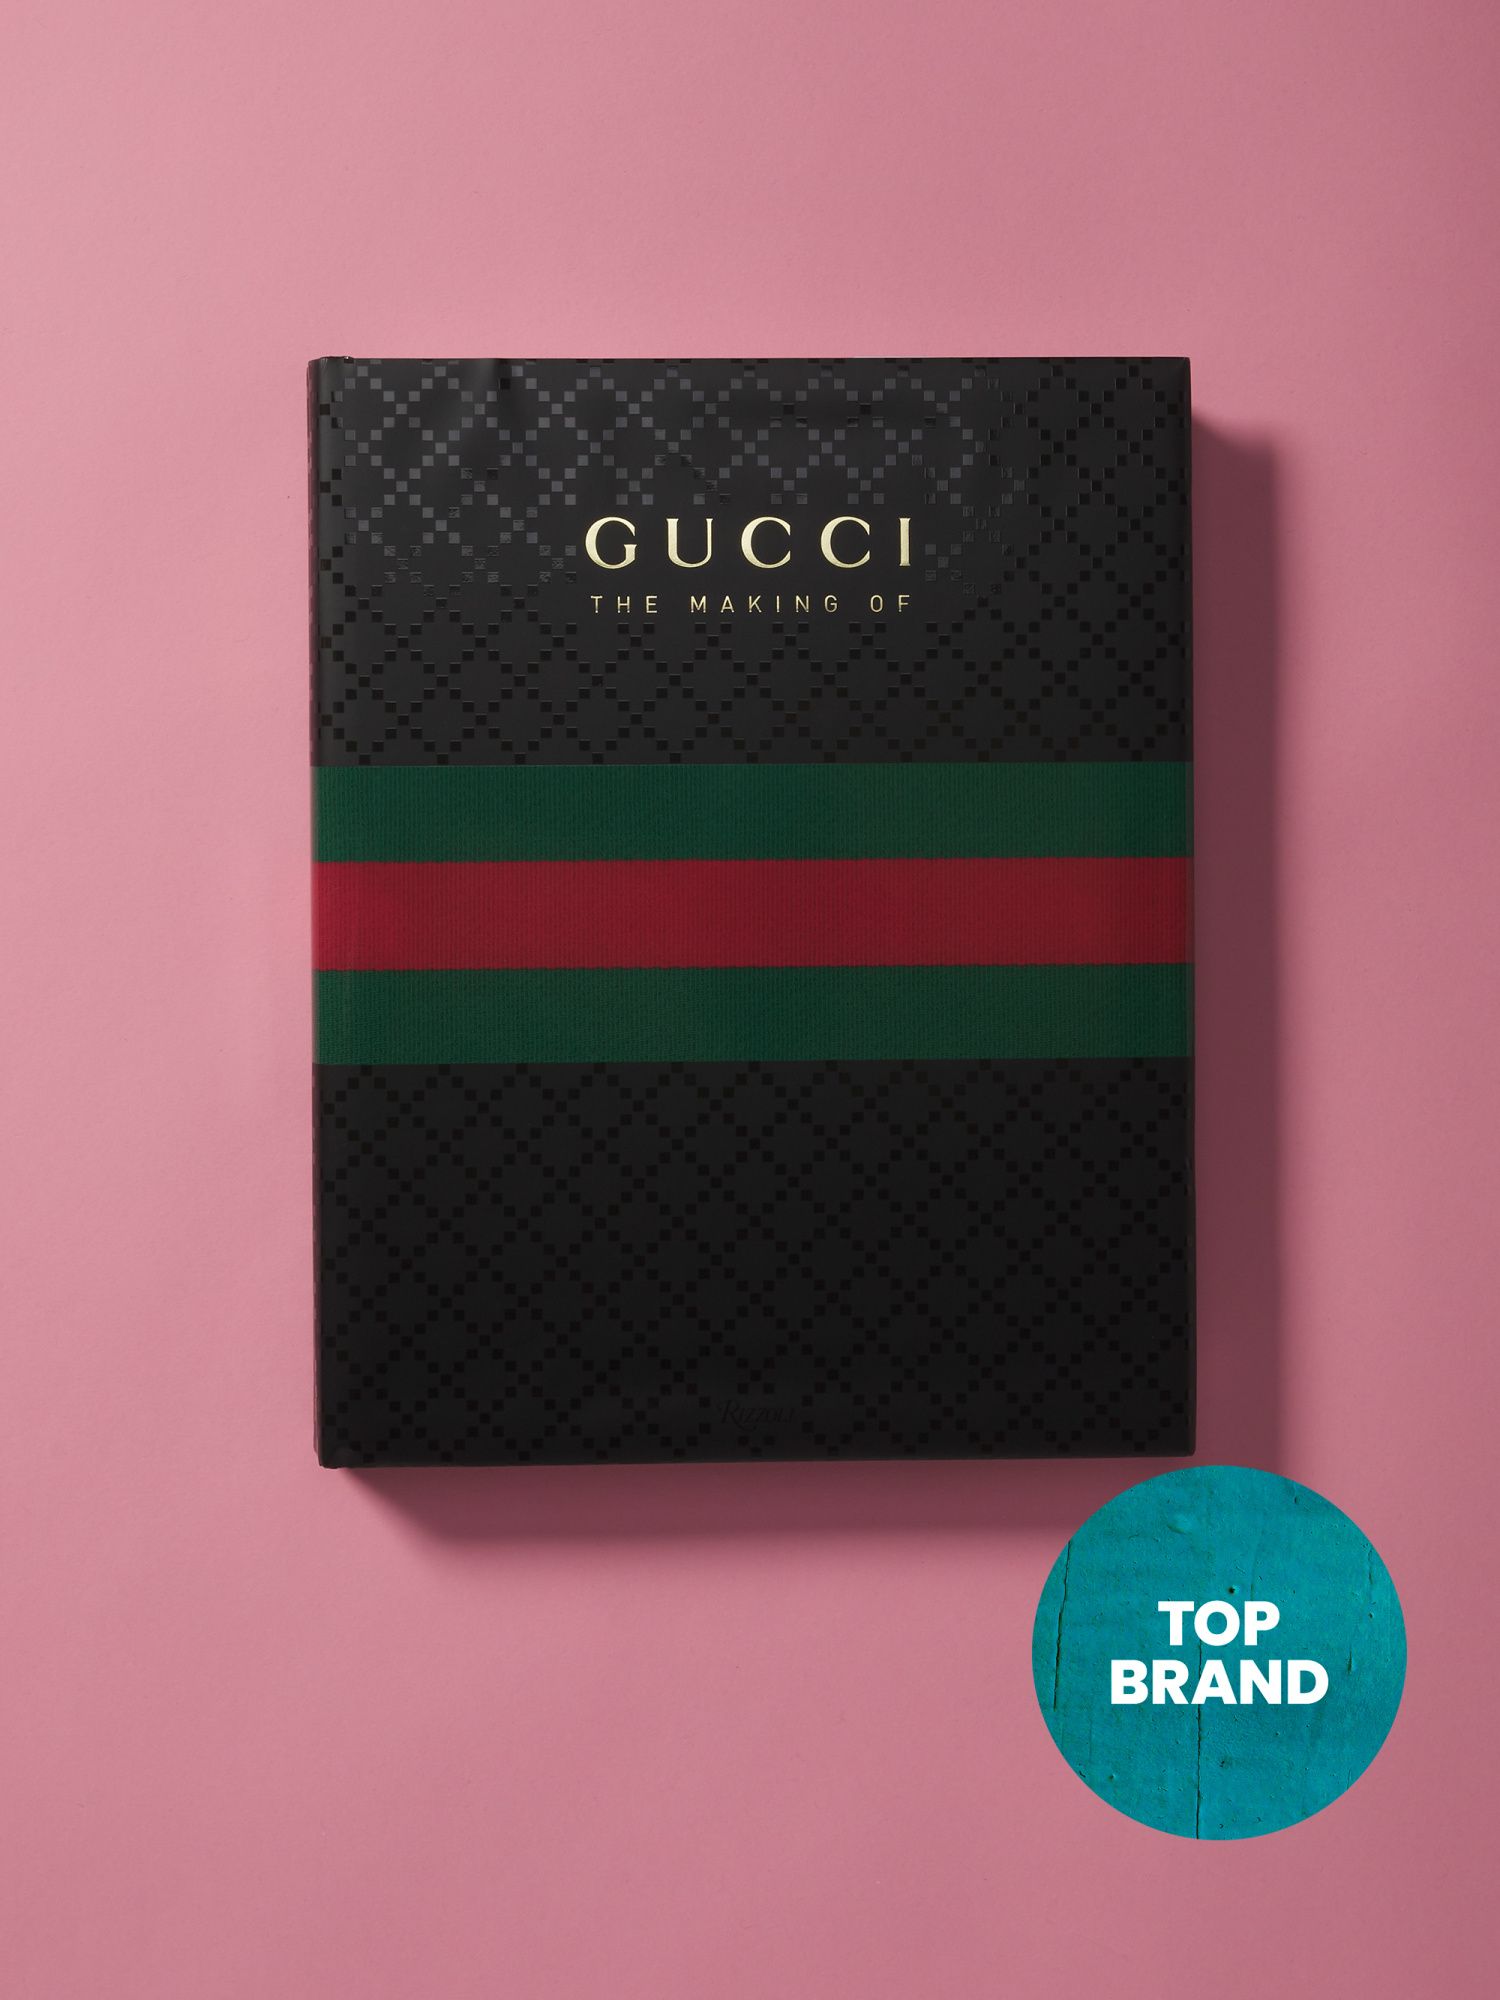 Gucci The Making Of Coffee Table Book | Decorative Accents | HomeGoods | HomeGoods